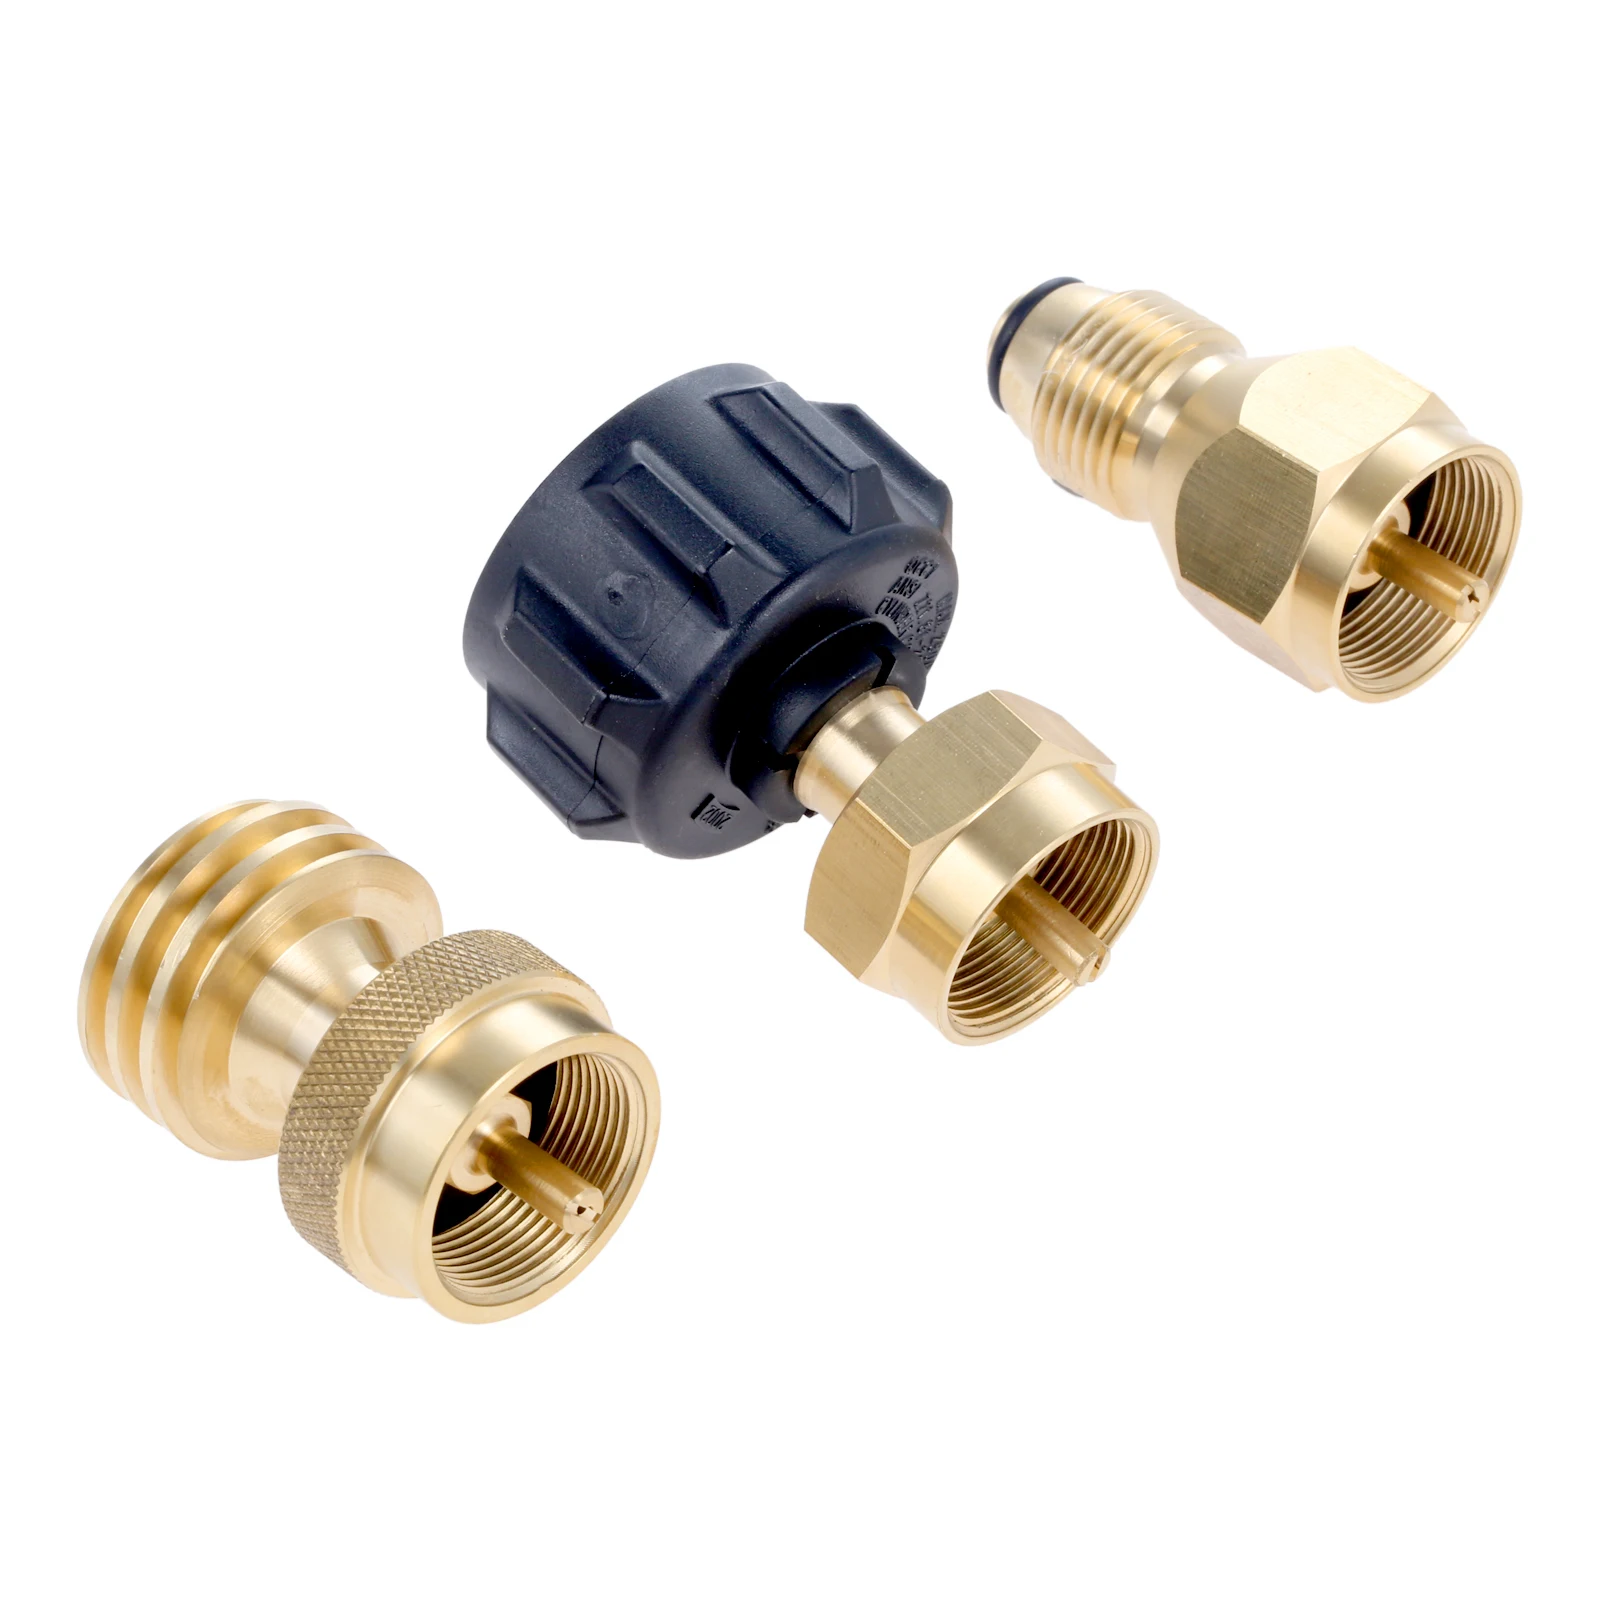 3pcs/pack Brass QCC1/POL Propane Adapter Set Refill Adapter Steak Saver Gas Grill Adapter for Disposable Small Bottle _ AliExpress Mobile